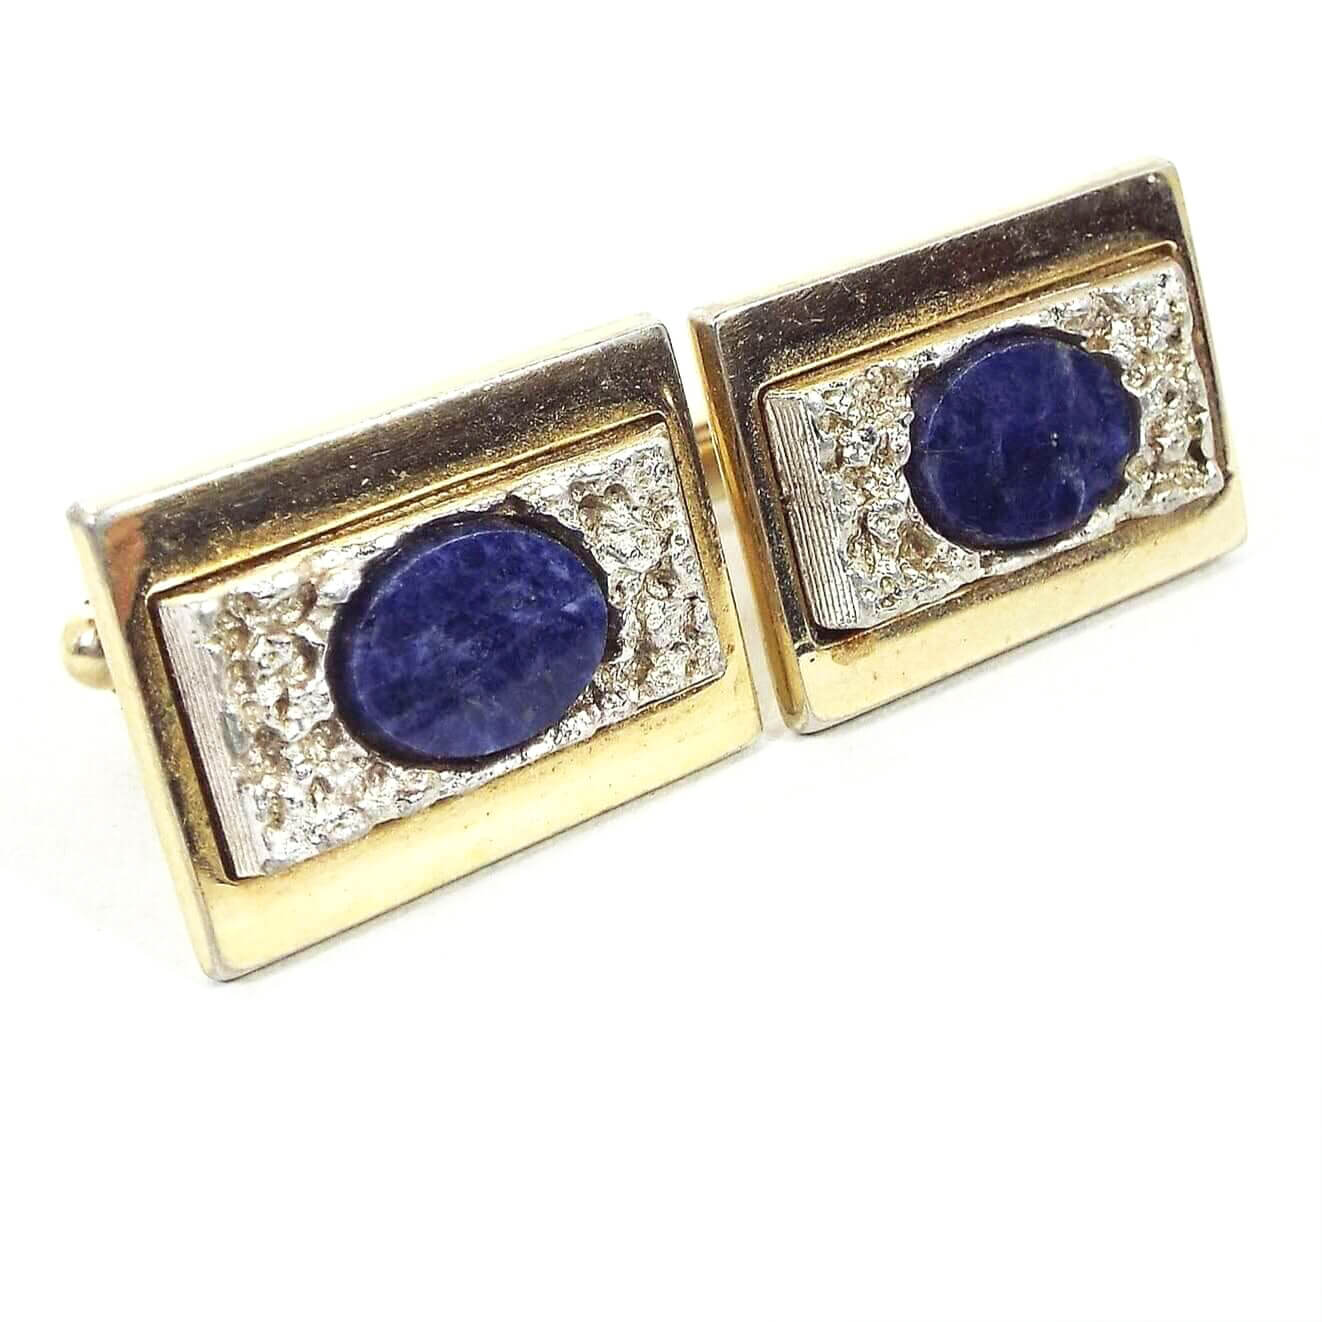 Angled front view of the retro vintage Anson sodalite cufflinks. The main color of the setting is gold tone. They are rectangular shaped with bumpy textured silver tone rectangles on the front. There are oval denim blue marbled sodalite gemstone cabs in the very middle. 